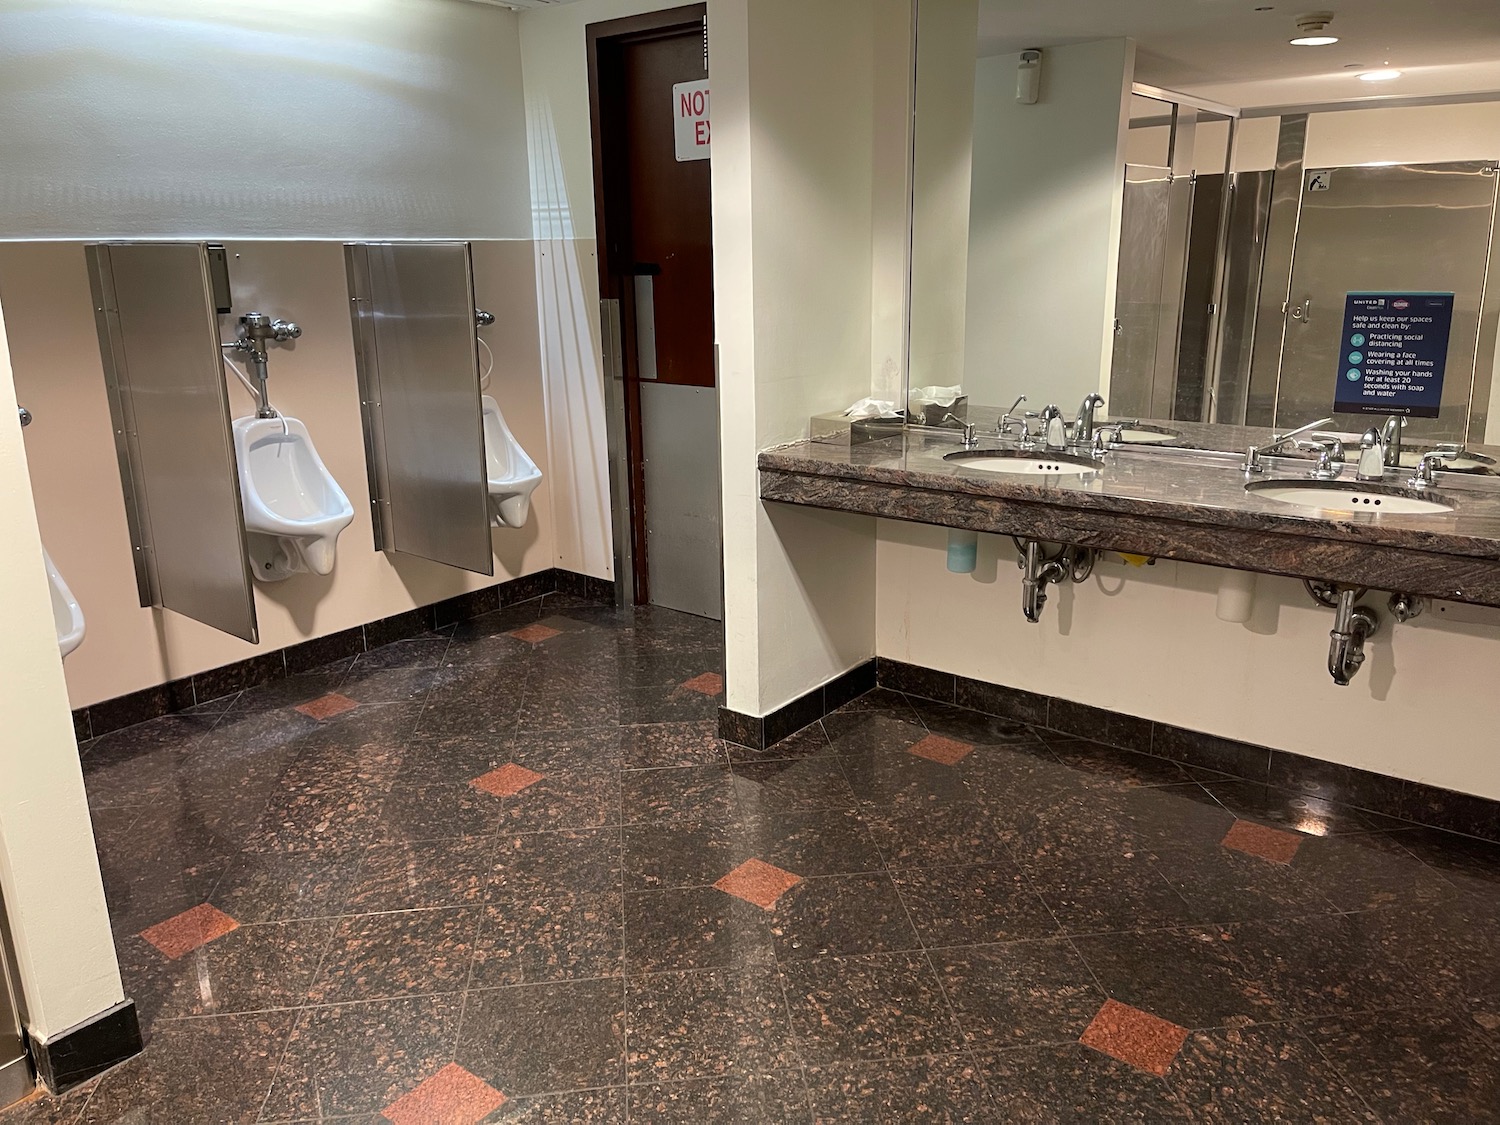 a bathroom with urinals and sinks